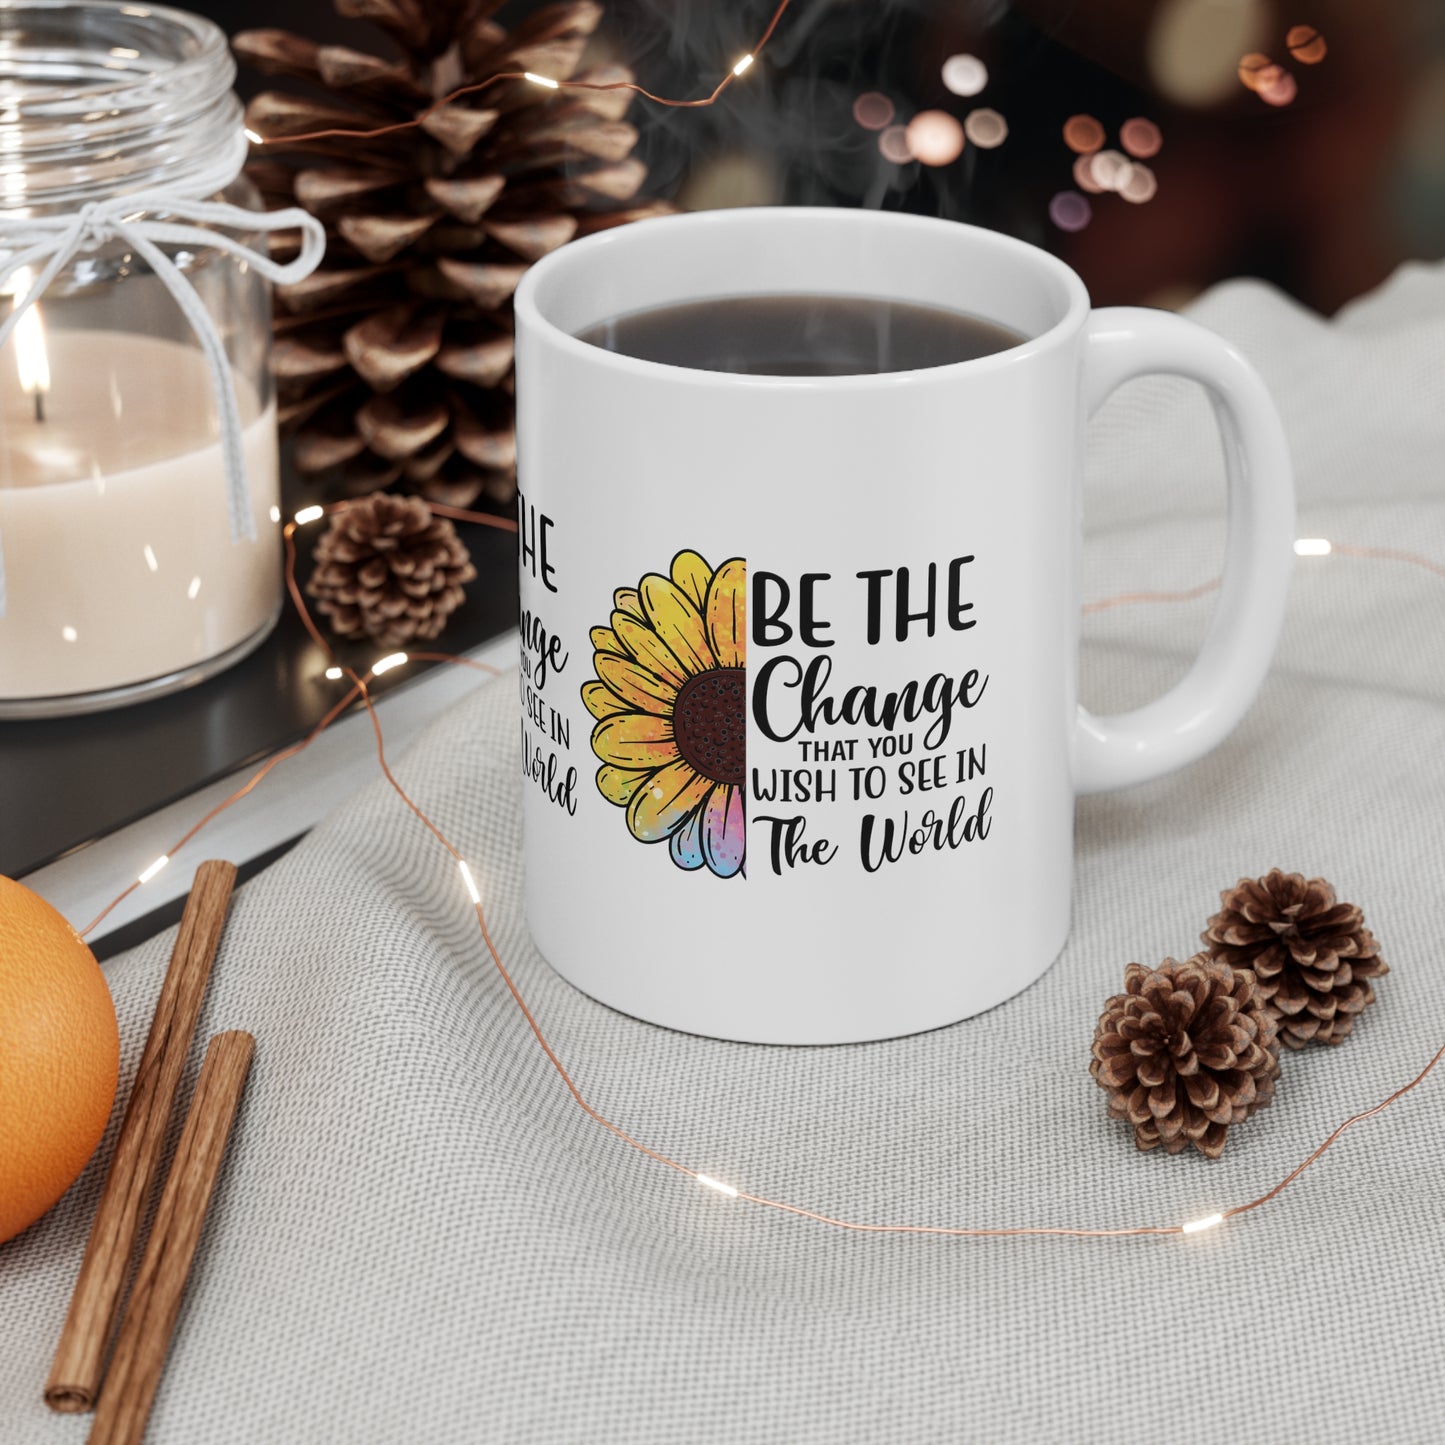 "BE THE CHANGE that you wish to see in the world" Inspirational Mug - MUGSCITY - Free Shipping